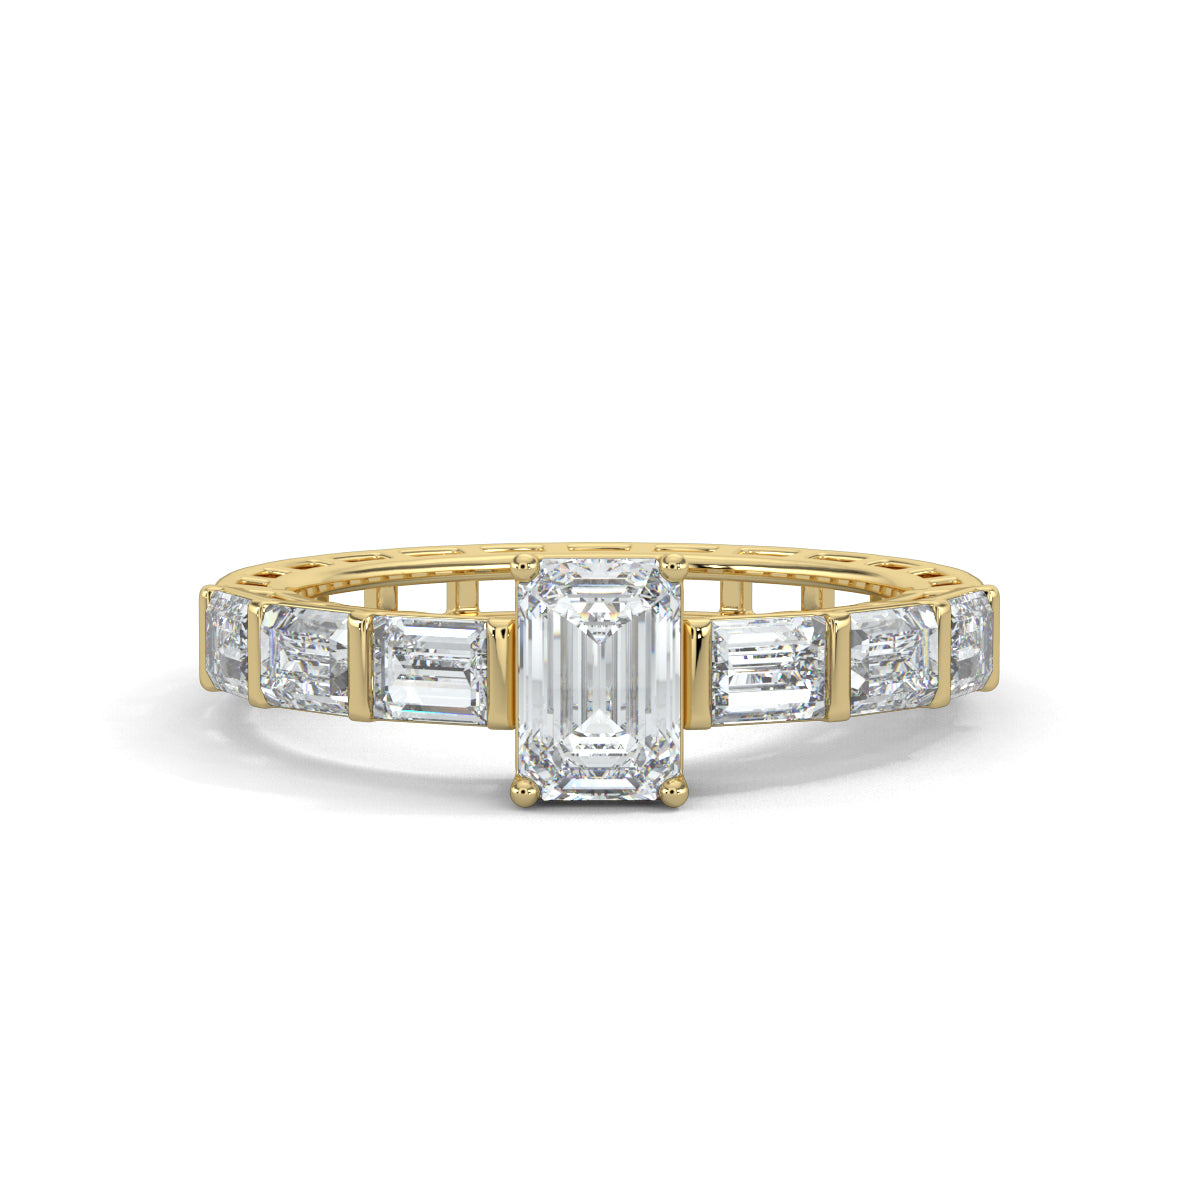 Yellow Gold, Diamond Ring, Natural diamond ring, Lab-grown diamond ring, emerald solitaire ring, eternity band, gallery-normal band, baguette diamonds, luxury jewelry, special occasion ring, emerald dreamscape band, elegant ring.